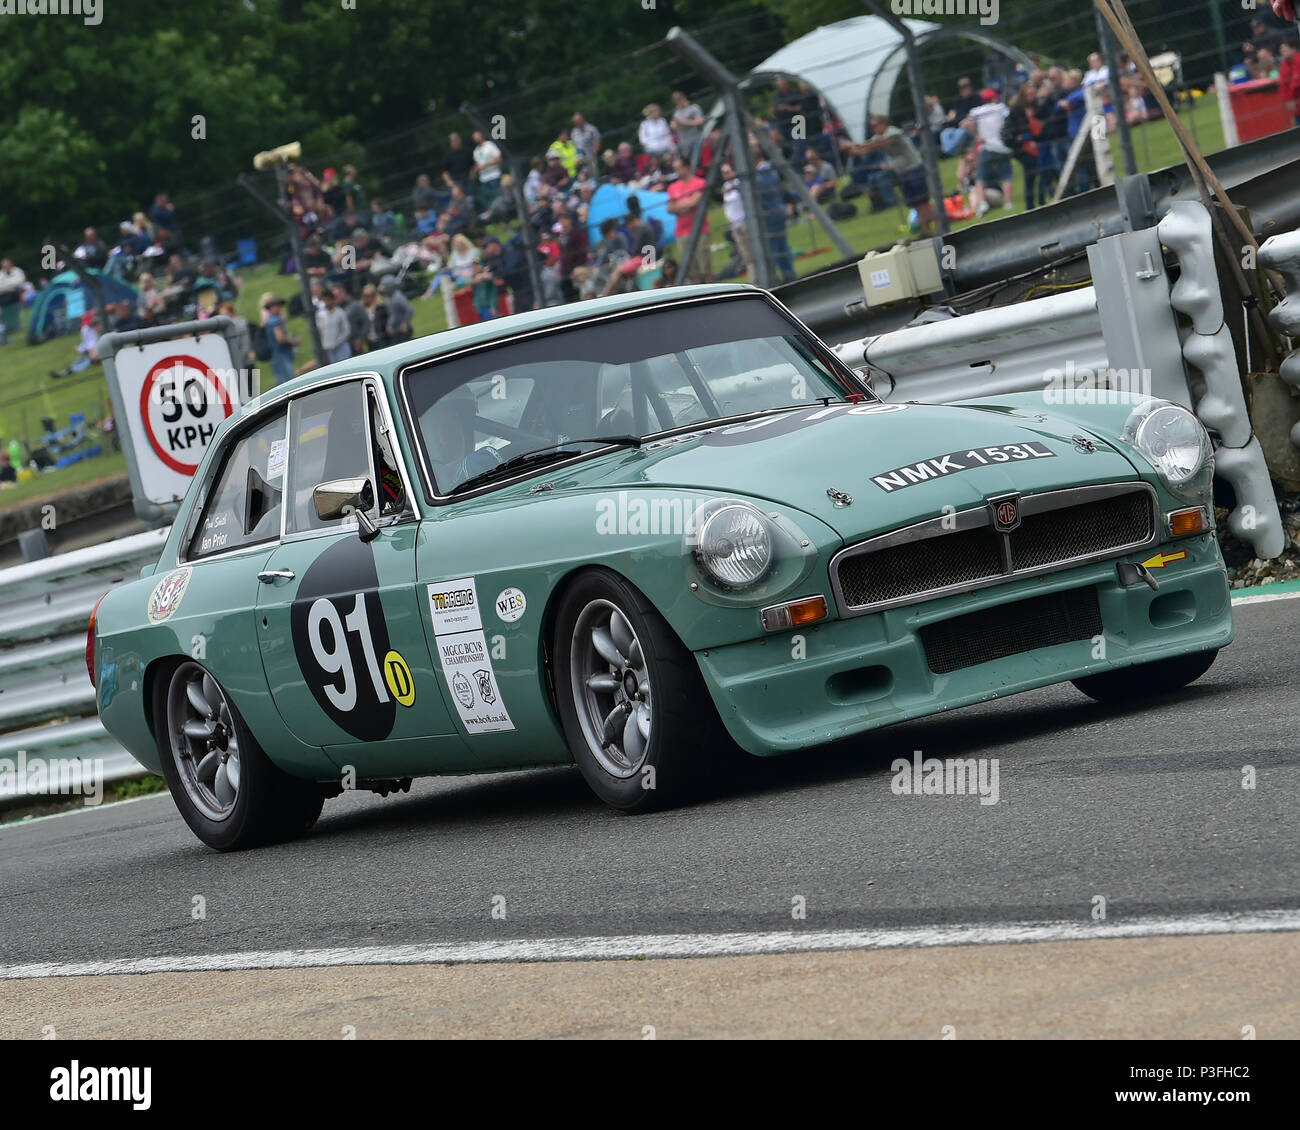 Ian Prior, MGB GT V8, Bernie's V8s, US Muscle Cars, American Speedfest VI, Brands Hatch, June 2018, automobiles, Autosport, cars, circuit racing, Engl Stock Photo